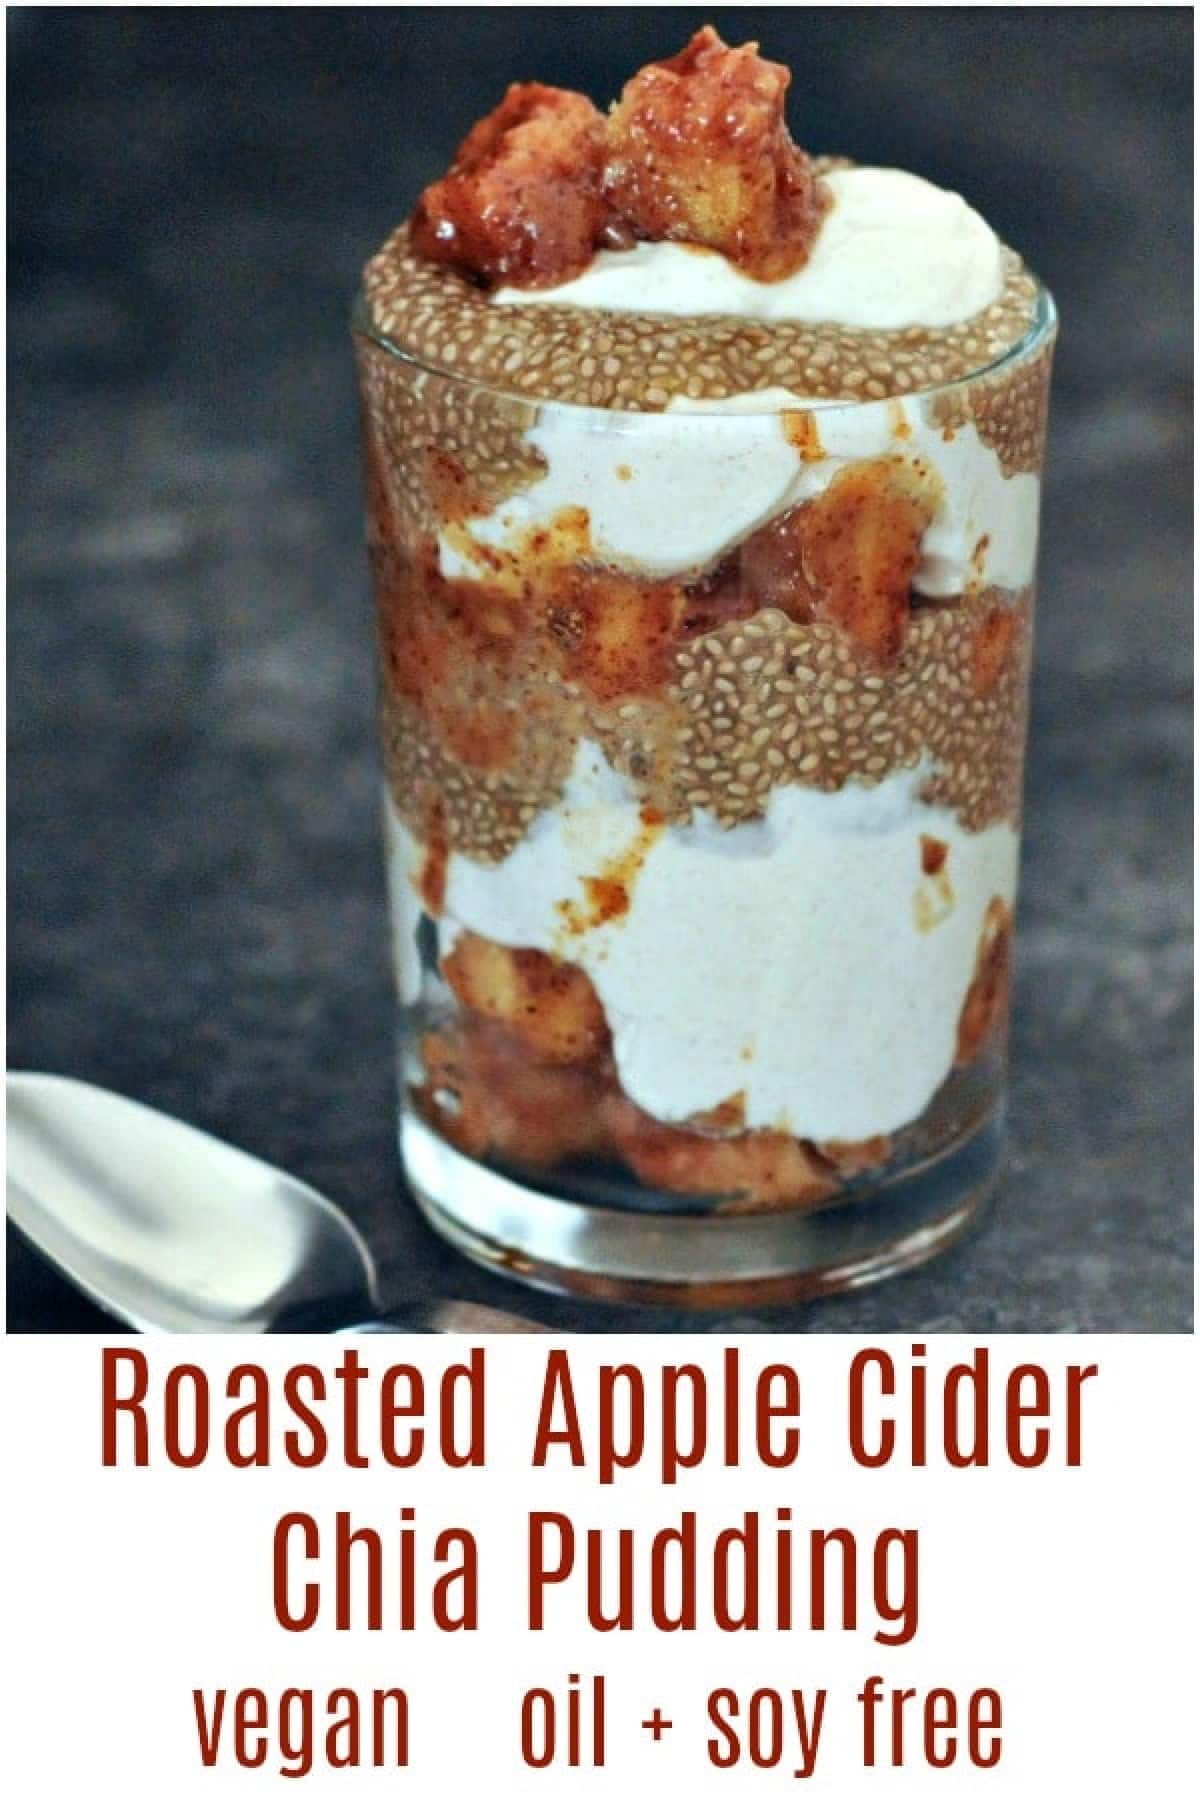 Roasted apples and chia pudding layered with yogurt and cubed apple in tall glass.